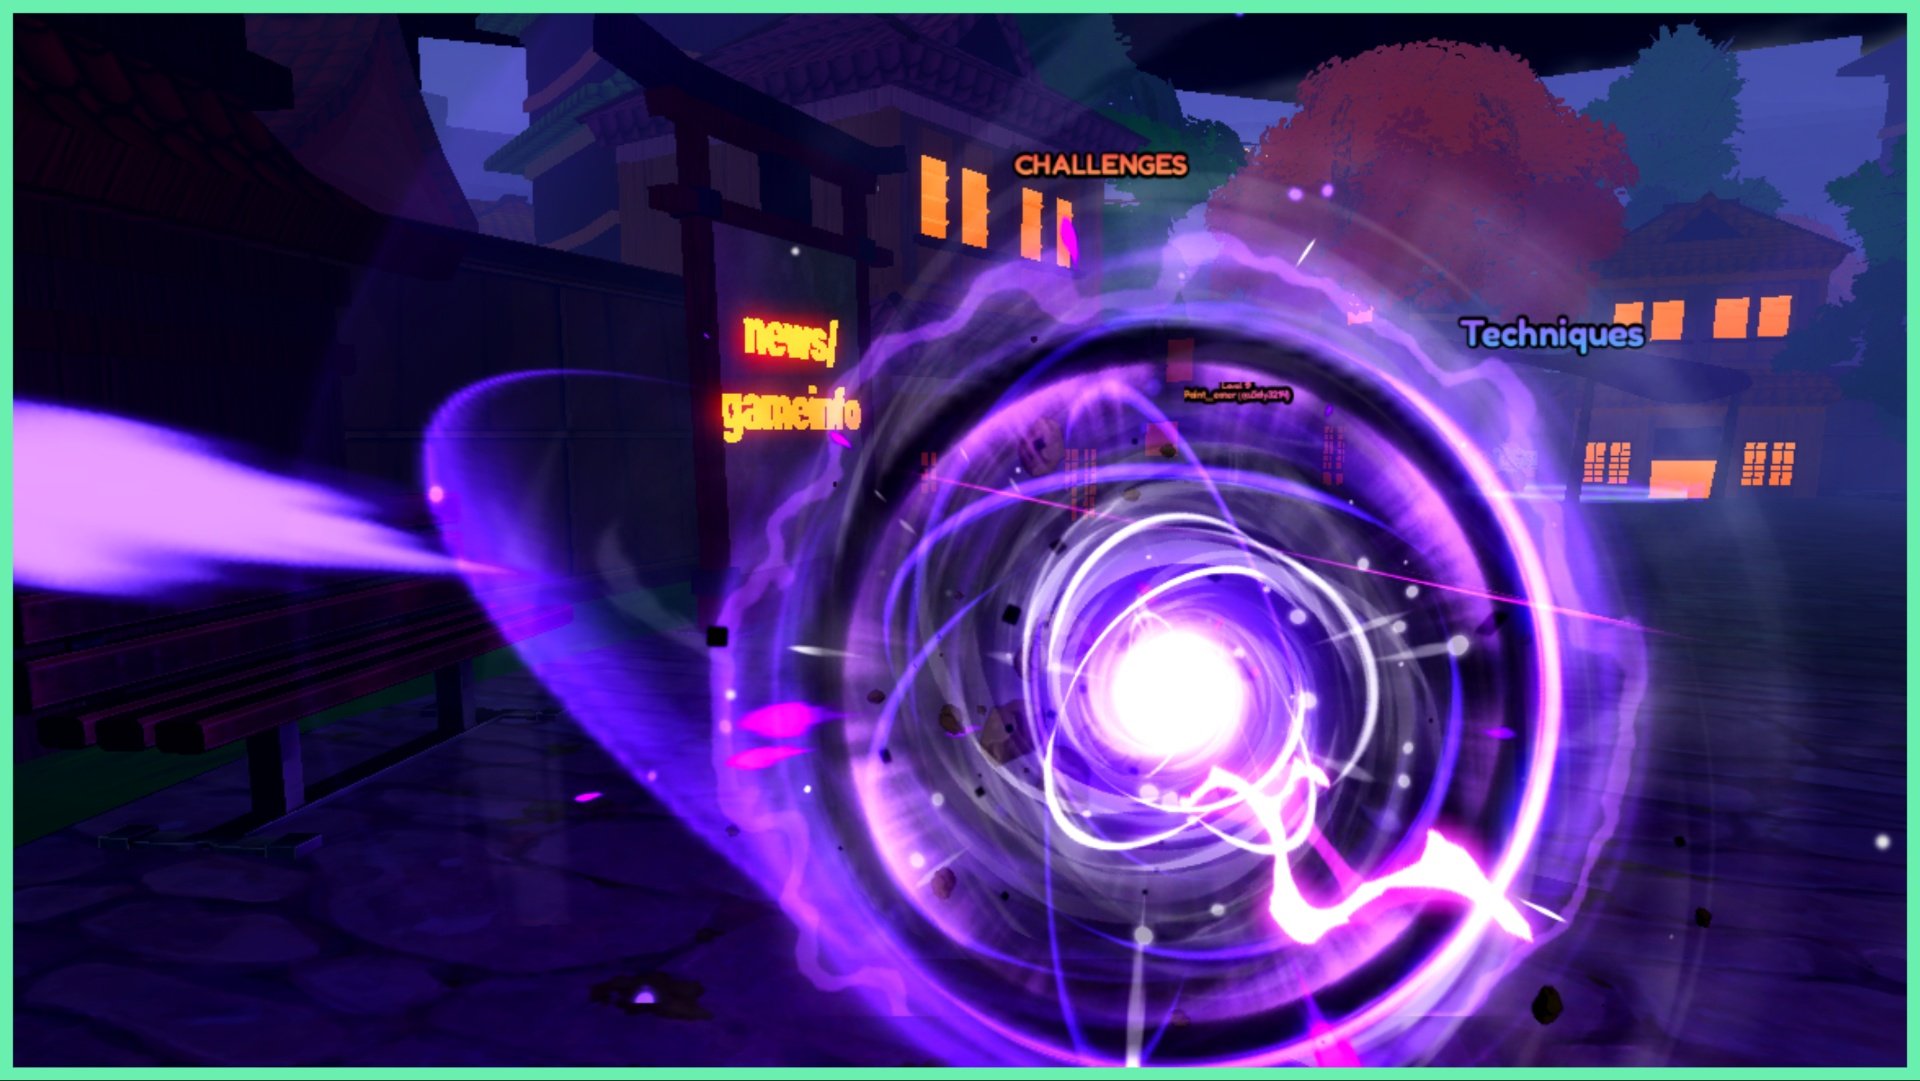 the image shows the lobby of ALS with a purple orb like portal in front of the buildings which is firing off sparks of purple electric